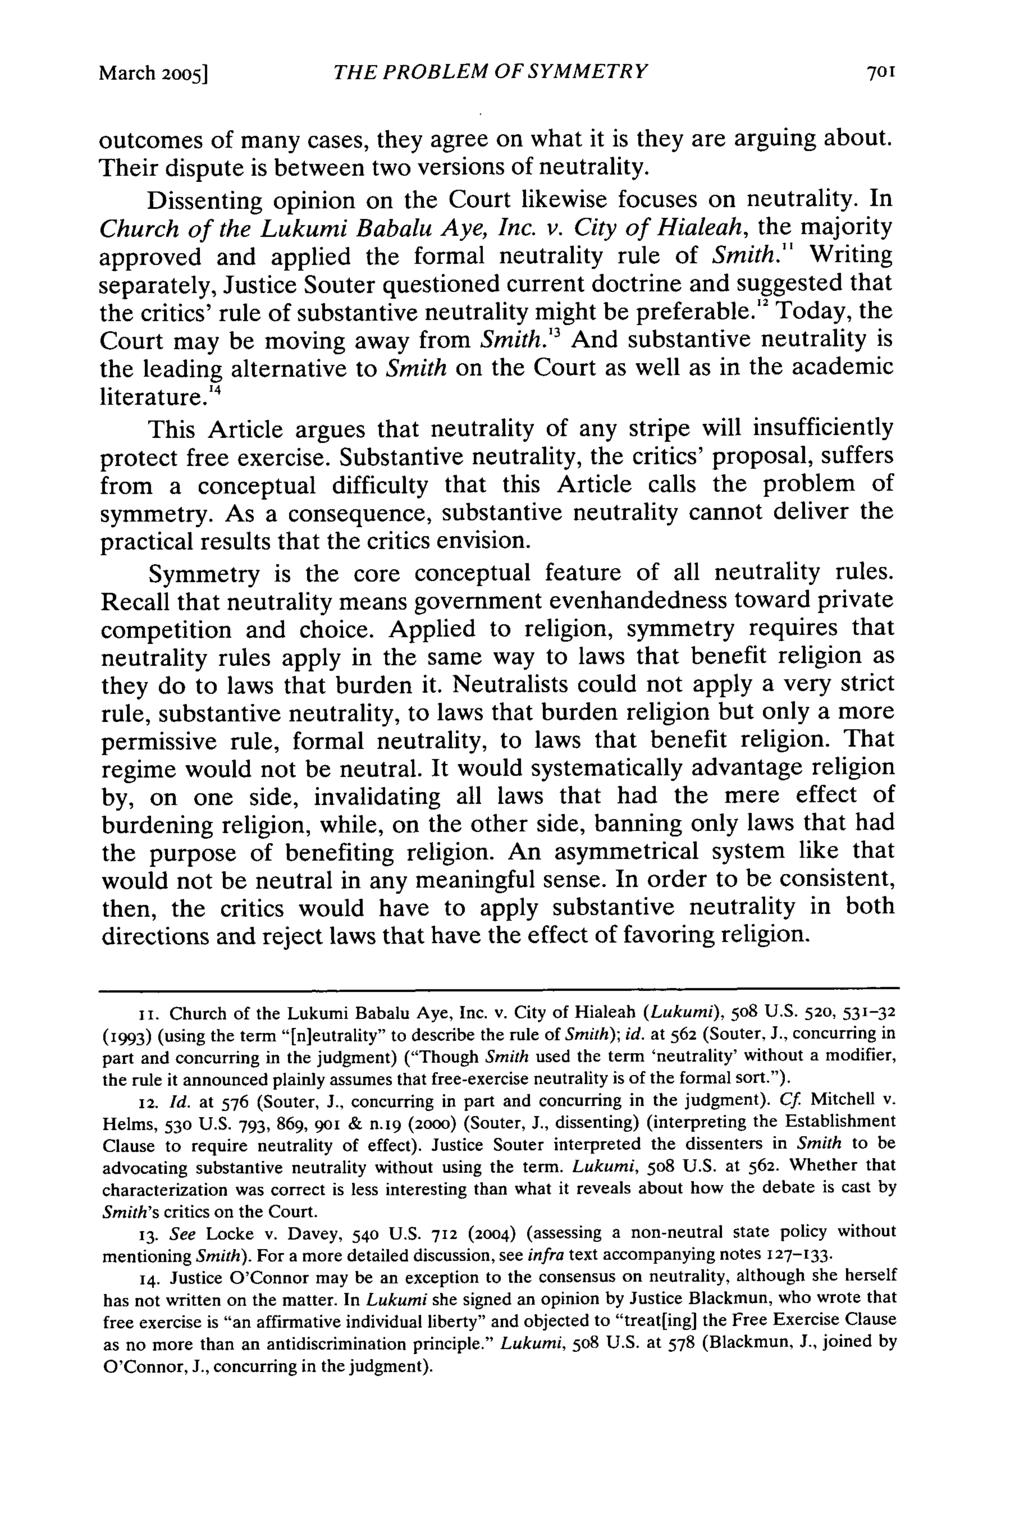 March 2005] THE PROBLEM OF SYMMETRY outcomes of many cases, they agree on what it is they are arguing about. Their dispute is between two versions of neutrality.